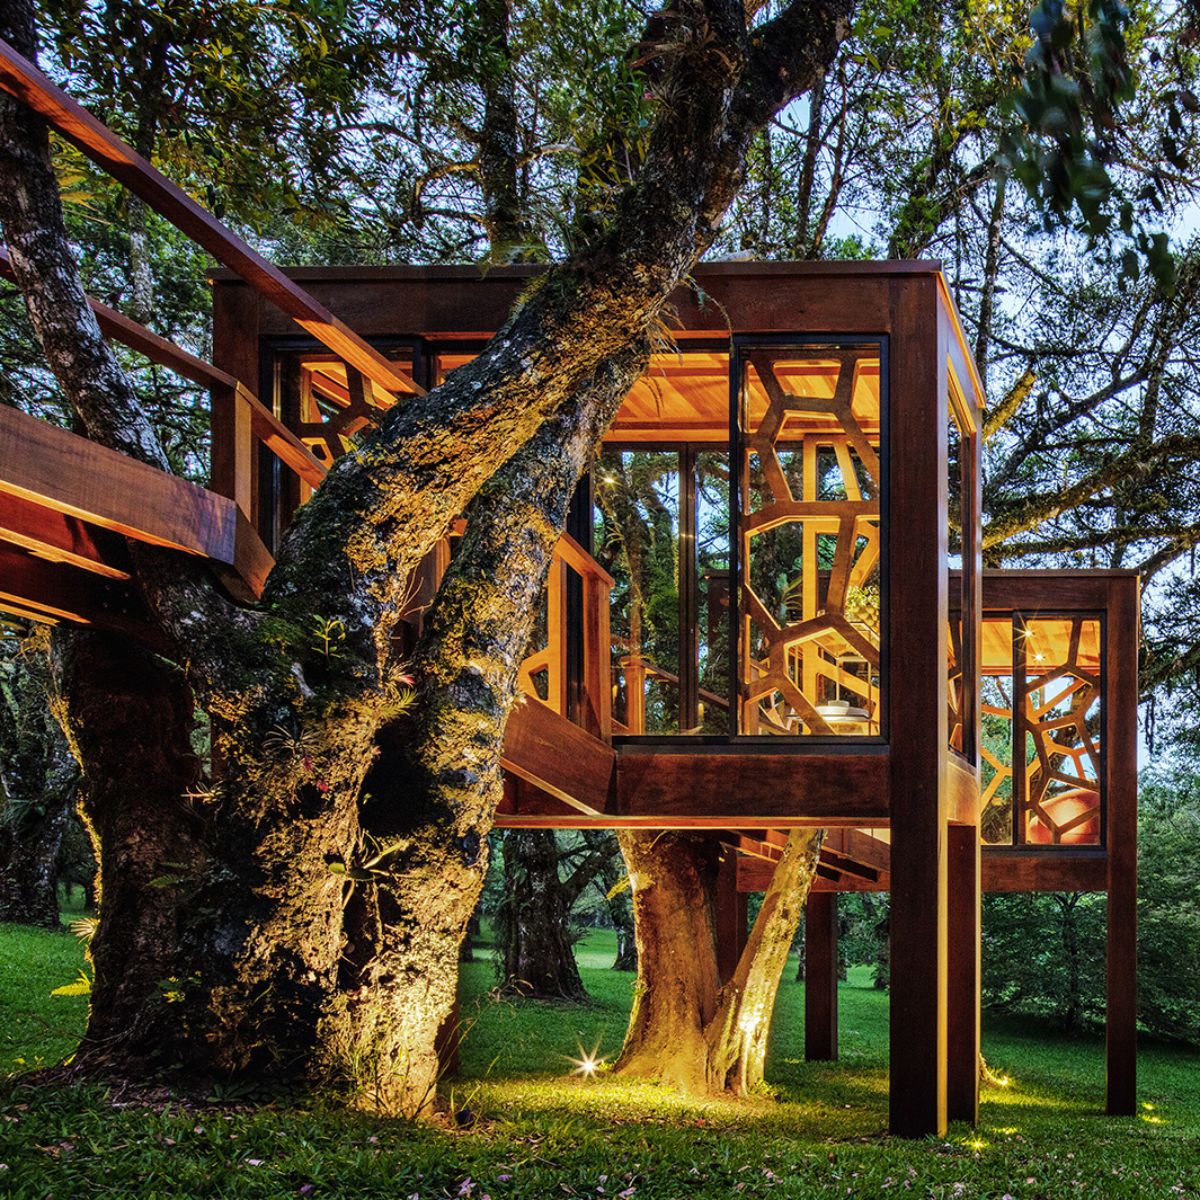 Wooden tree house intended to bring back playful inner self